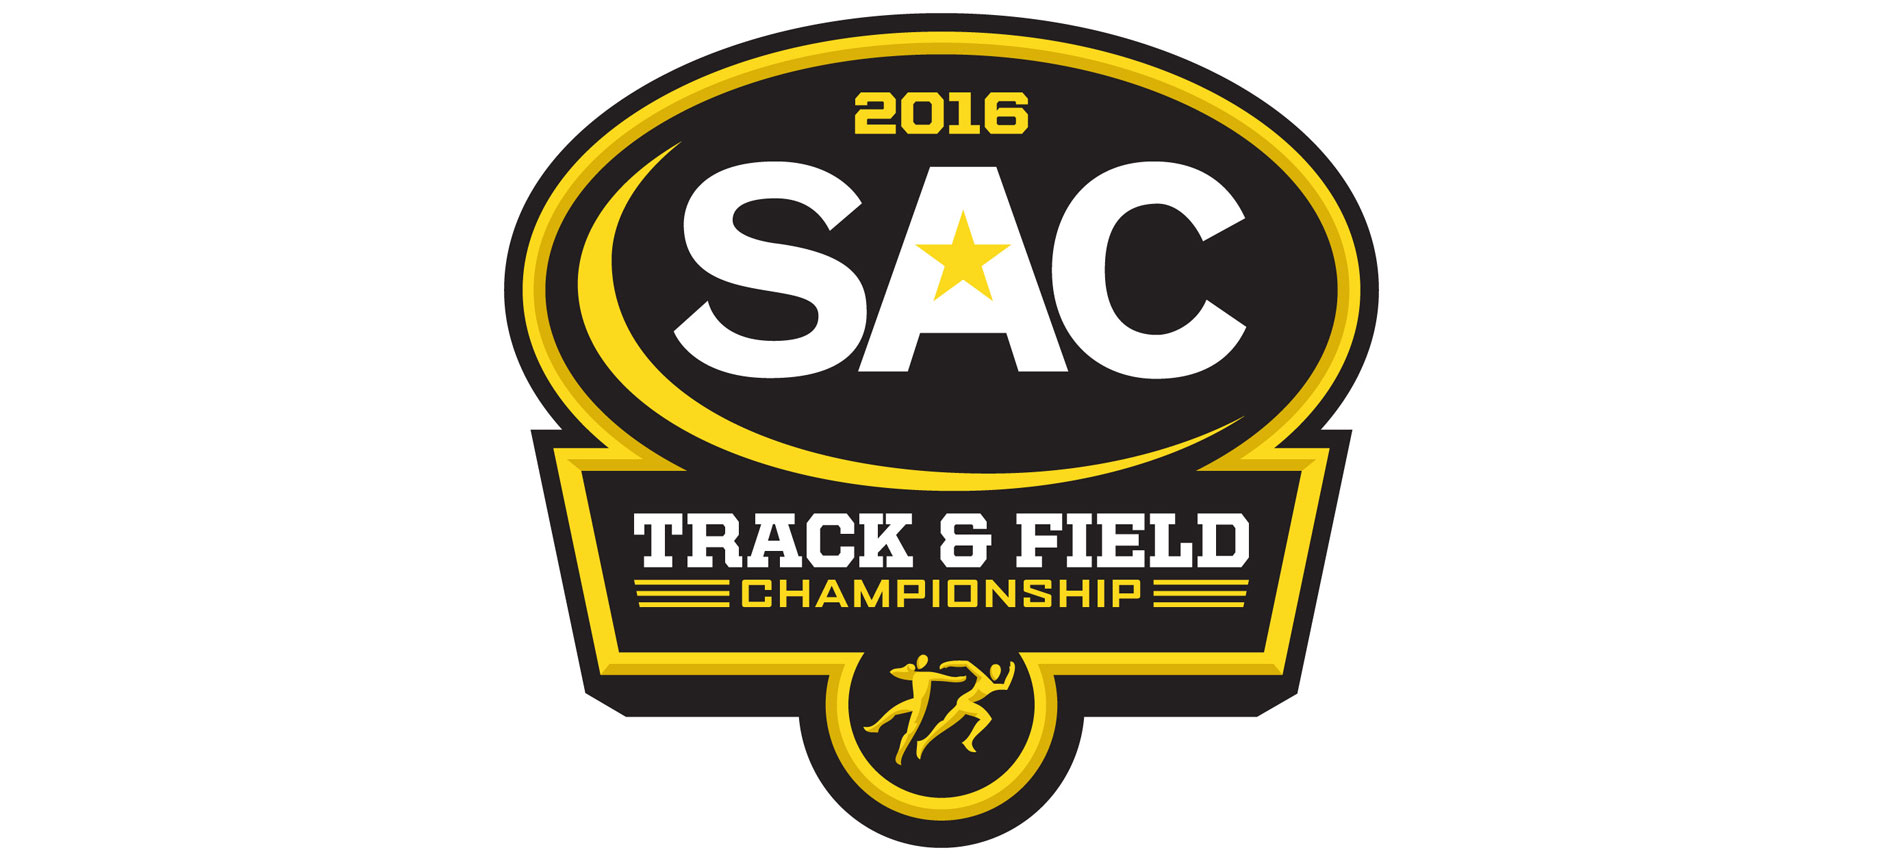 Women are Fourth, Men Sixth after First Day of SAC Track and Field Championships